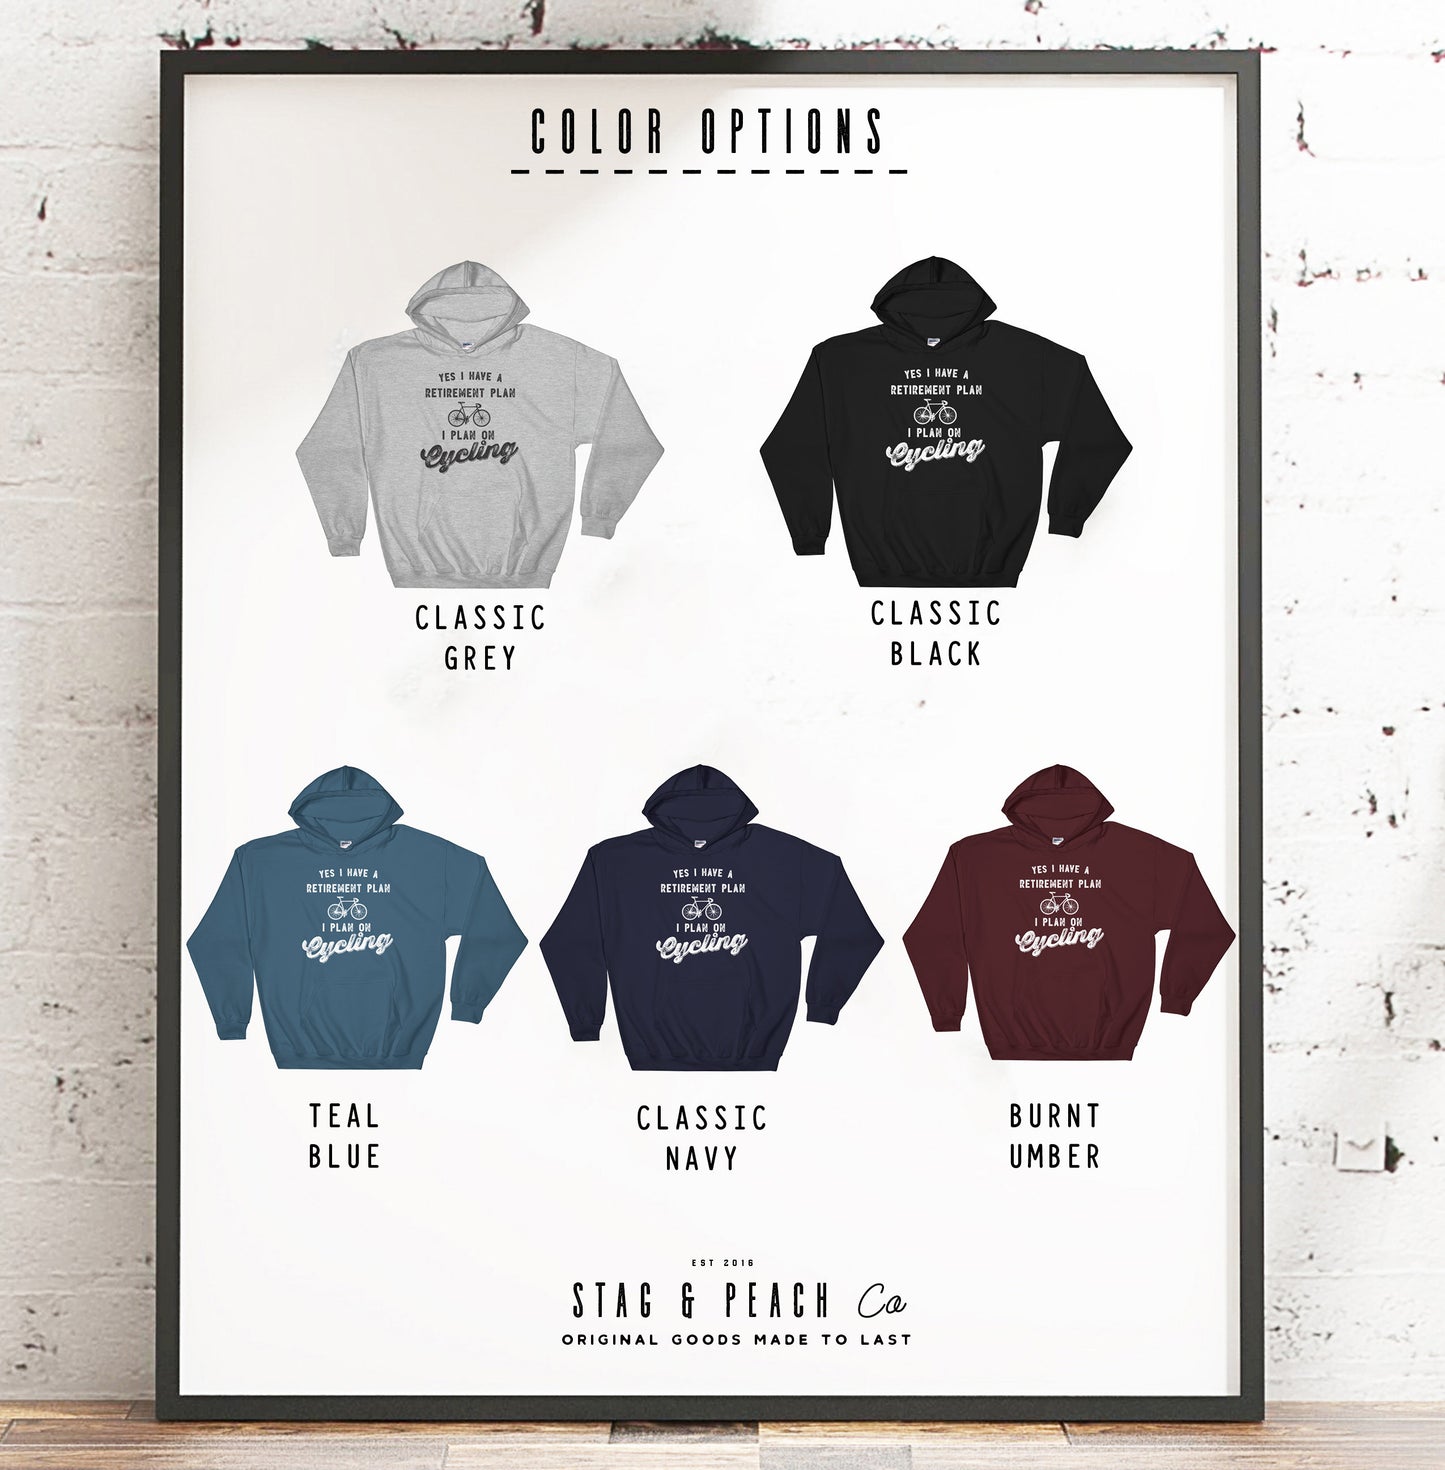 Yes I Have A Retirement Plan I Plan On Cycling Hoodie - Cycling Hoodie, Bicycle Shirt, Bicycle Tshirt, Bicycle Lover Gift, Cycling Shirt